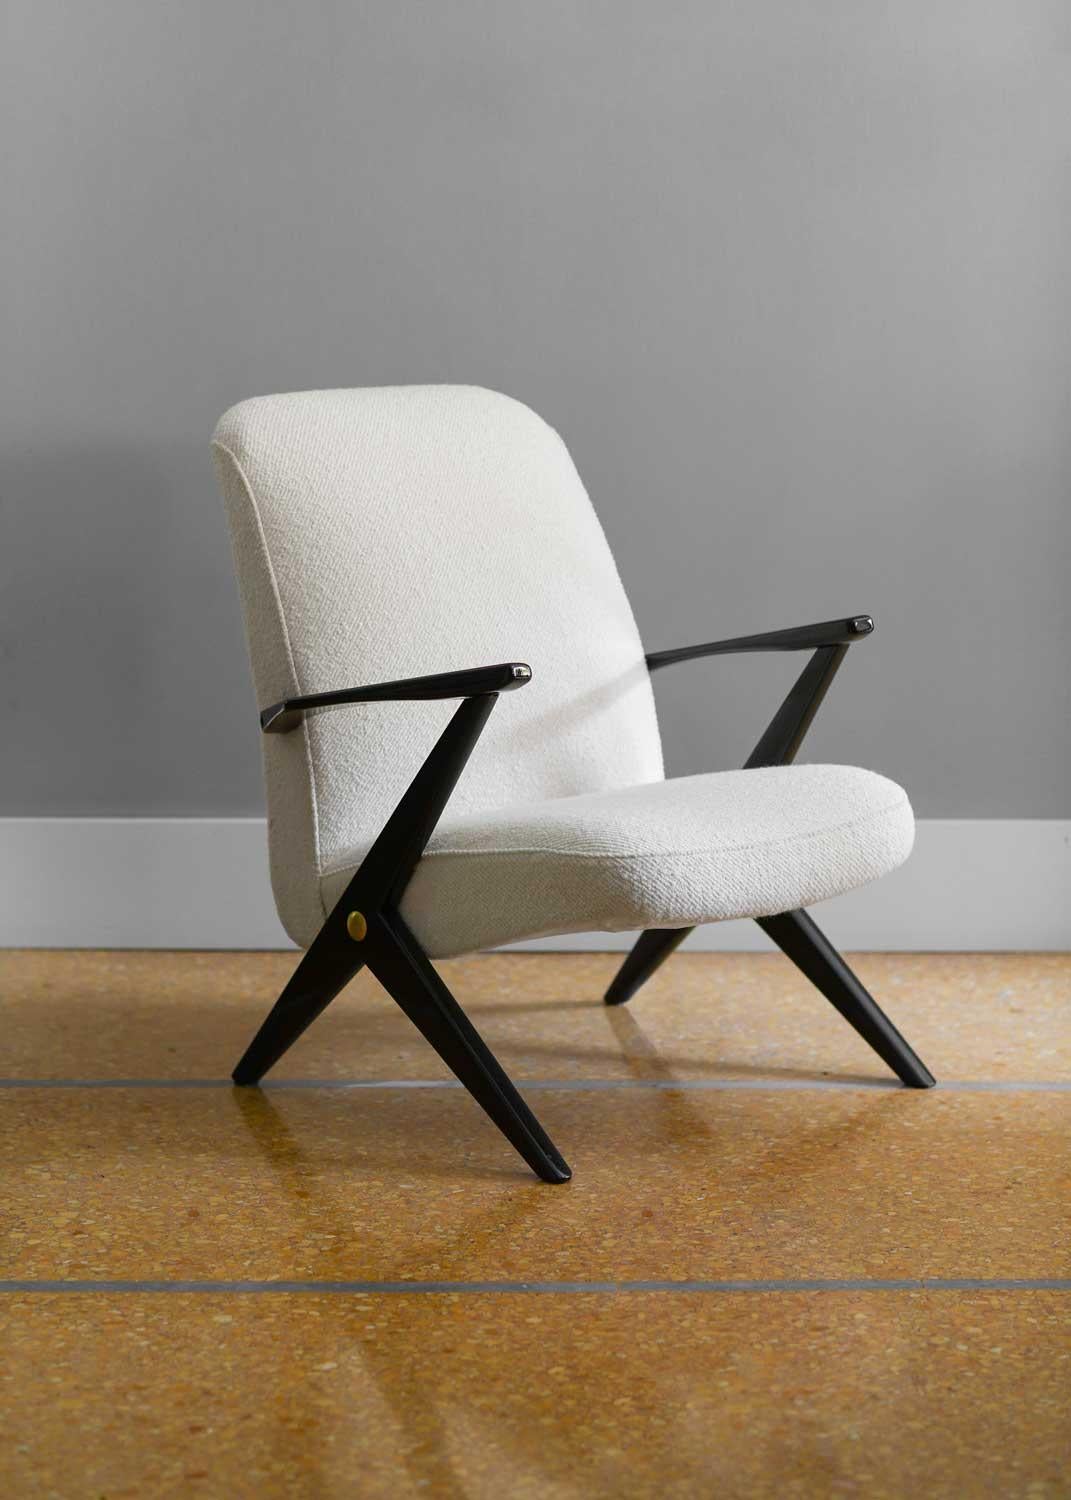 Pair of Triva armchairs by Bengt Ruda
Product details
Single armchair dimensions: 65L x 80H x 70D cm
Materials: wood, fabric
Production: Nordisk Kompaniets Verkstader ca 1955